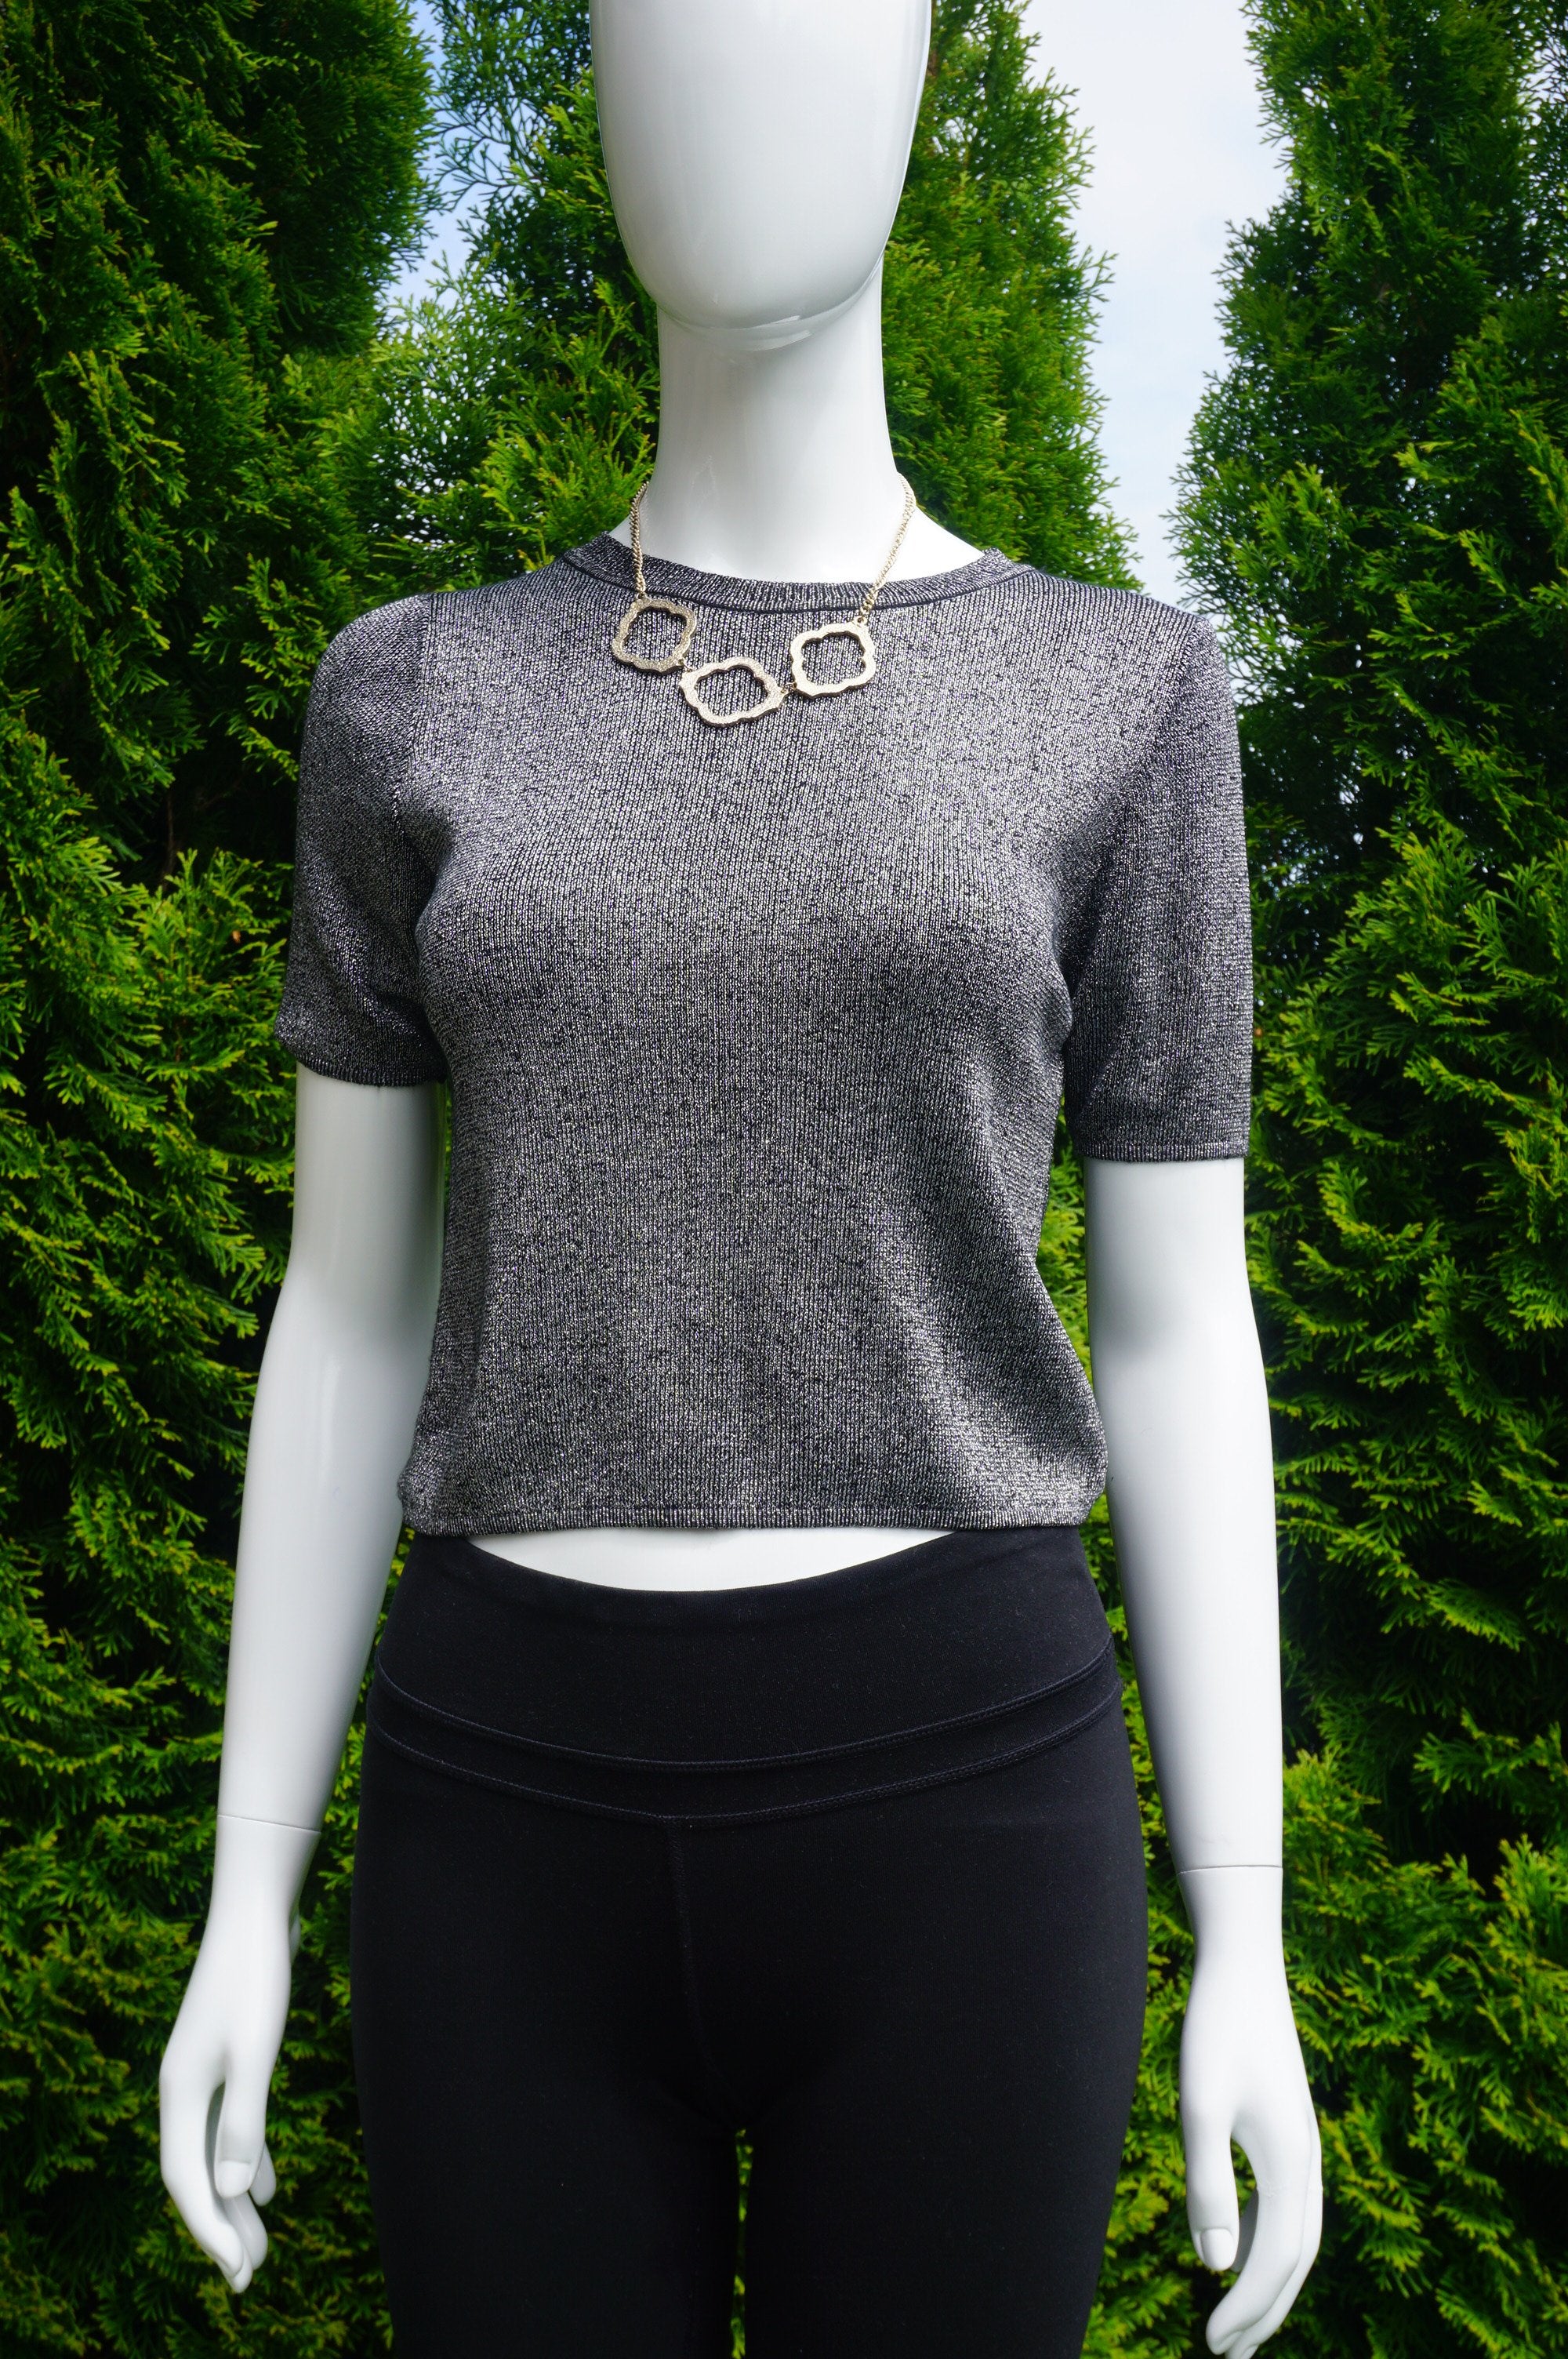 New Look Grey Short Sleeve Metallic Stretchy Top/Sweater, Simple and stylish short/cropped top. A pair with high waisted jeans and short boots would go perfectly with it., Grey, Polyester, Metalised fiber, and elastane., women's Tops, women's Grey Tops, New Look women's Tops, cropped top, cropped sweater, short top, short spring sweater, short sleeve sweater, short sleeve stretchy sweater